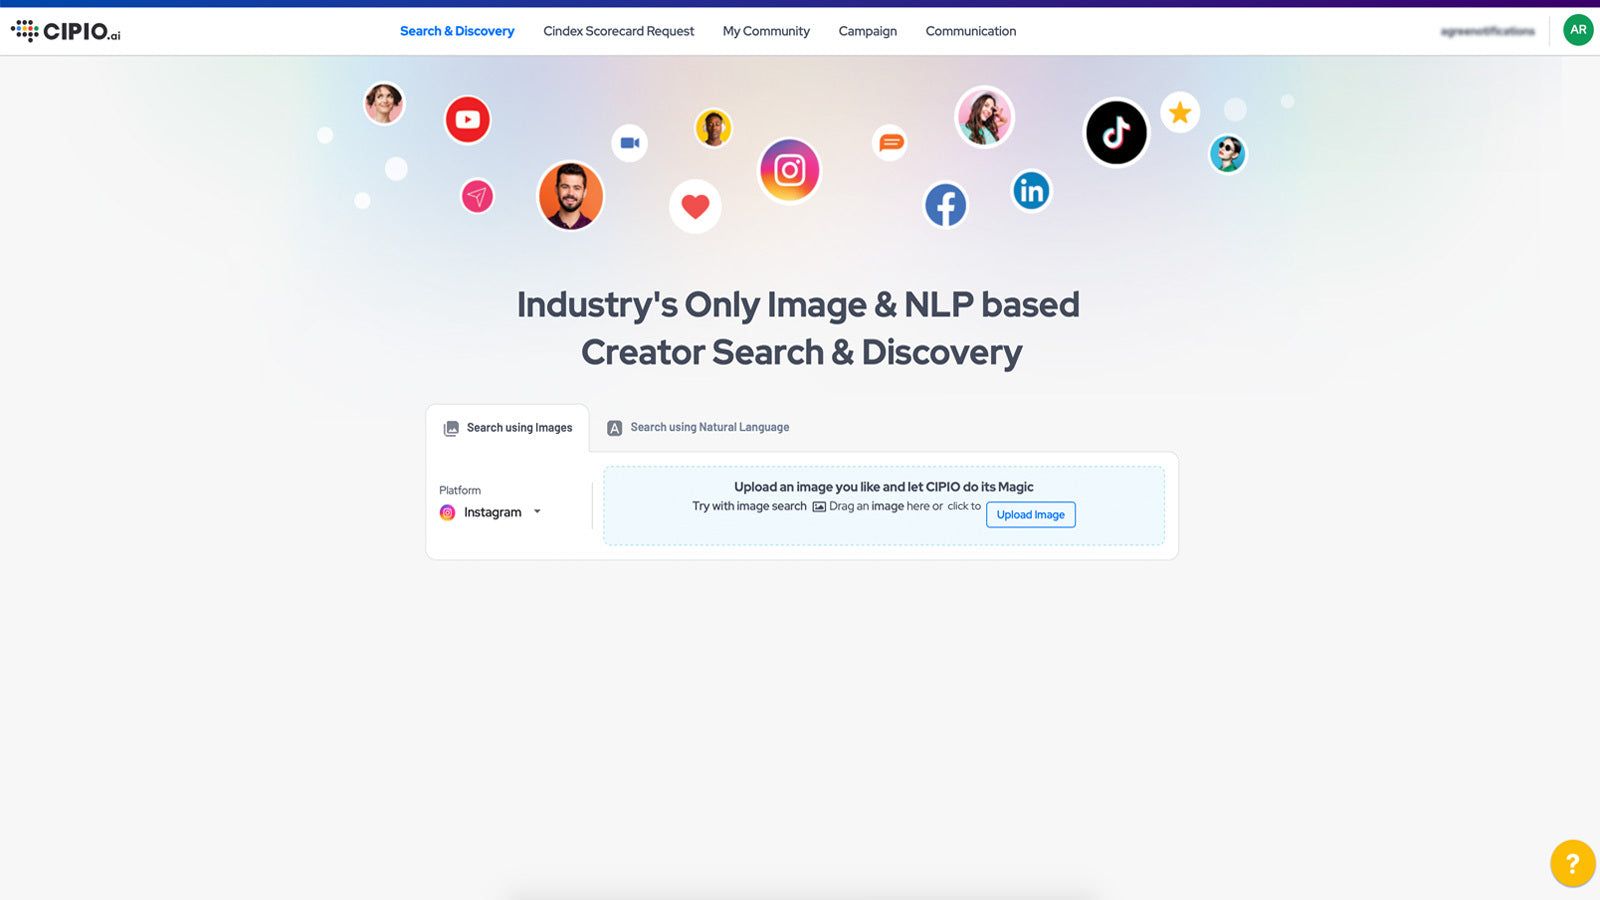 Precision Community Influencer Search & Discovery